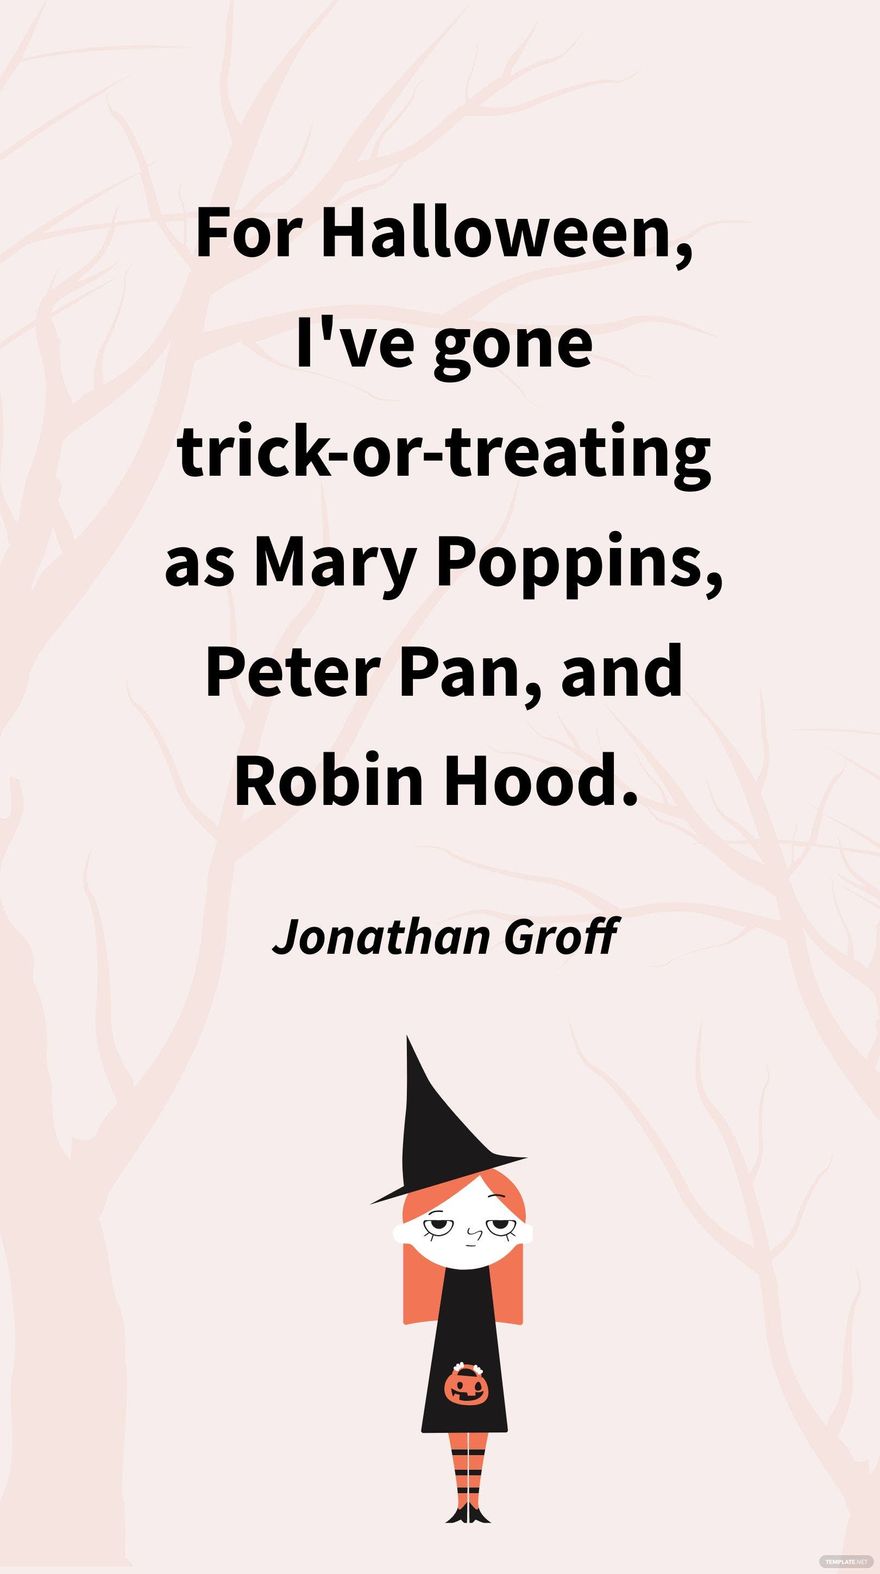 Free Jonathan Groff - For Halloween, I've gone trick-or-treating as Mary Poppins, Peter Pan, and Robin Hood. in JPG